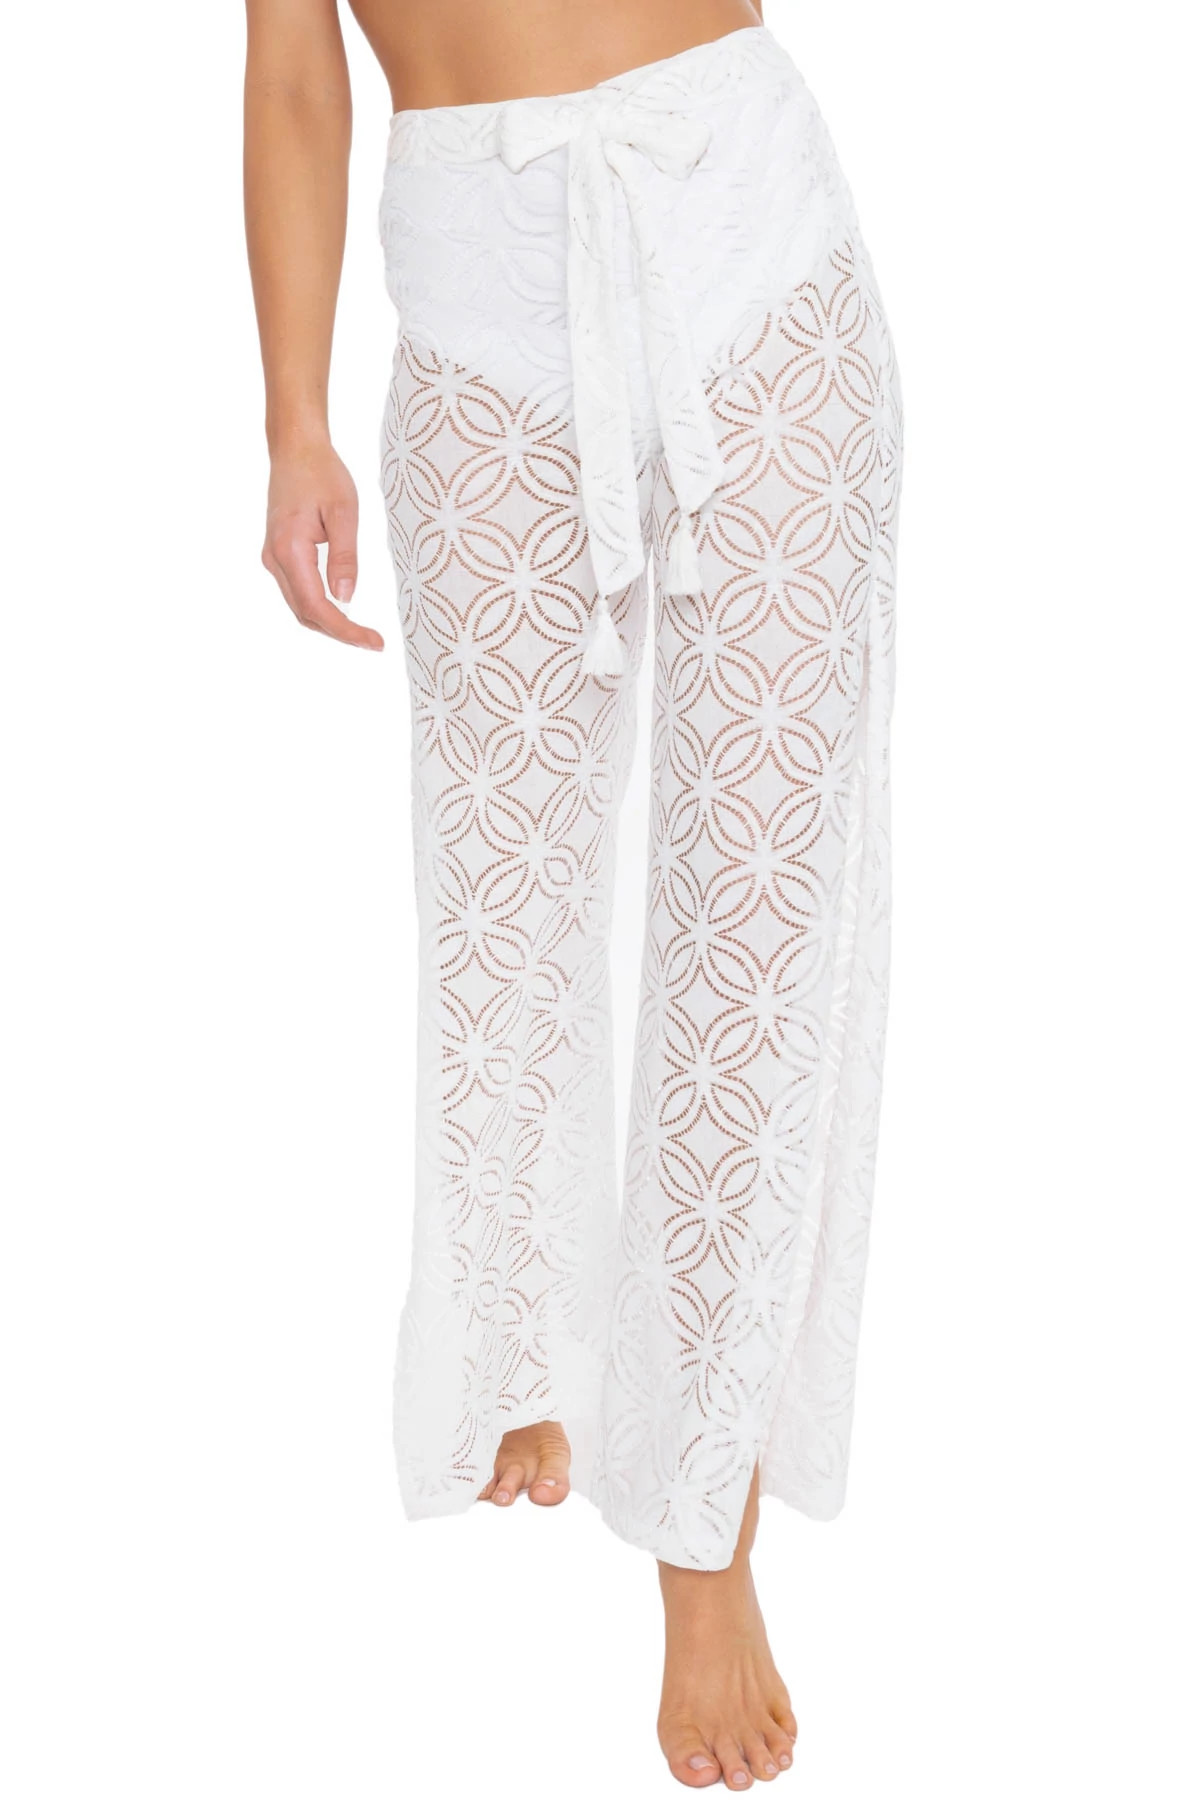 WHITE Pacheco Crochet Pants image number 1